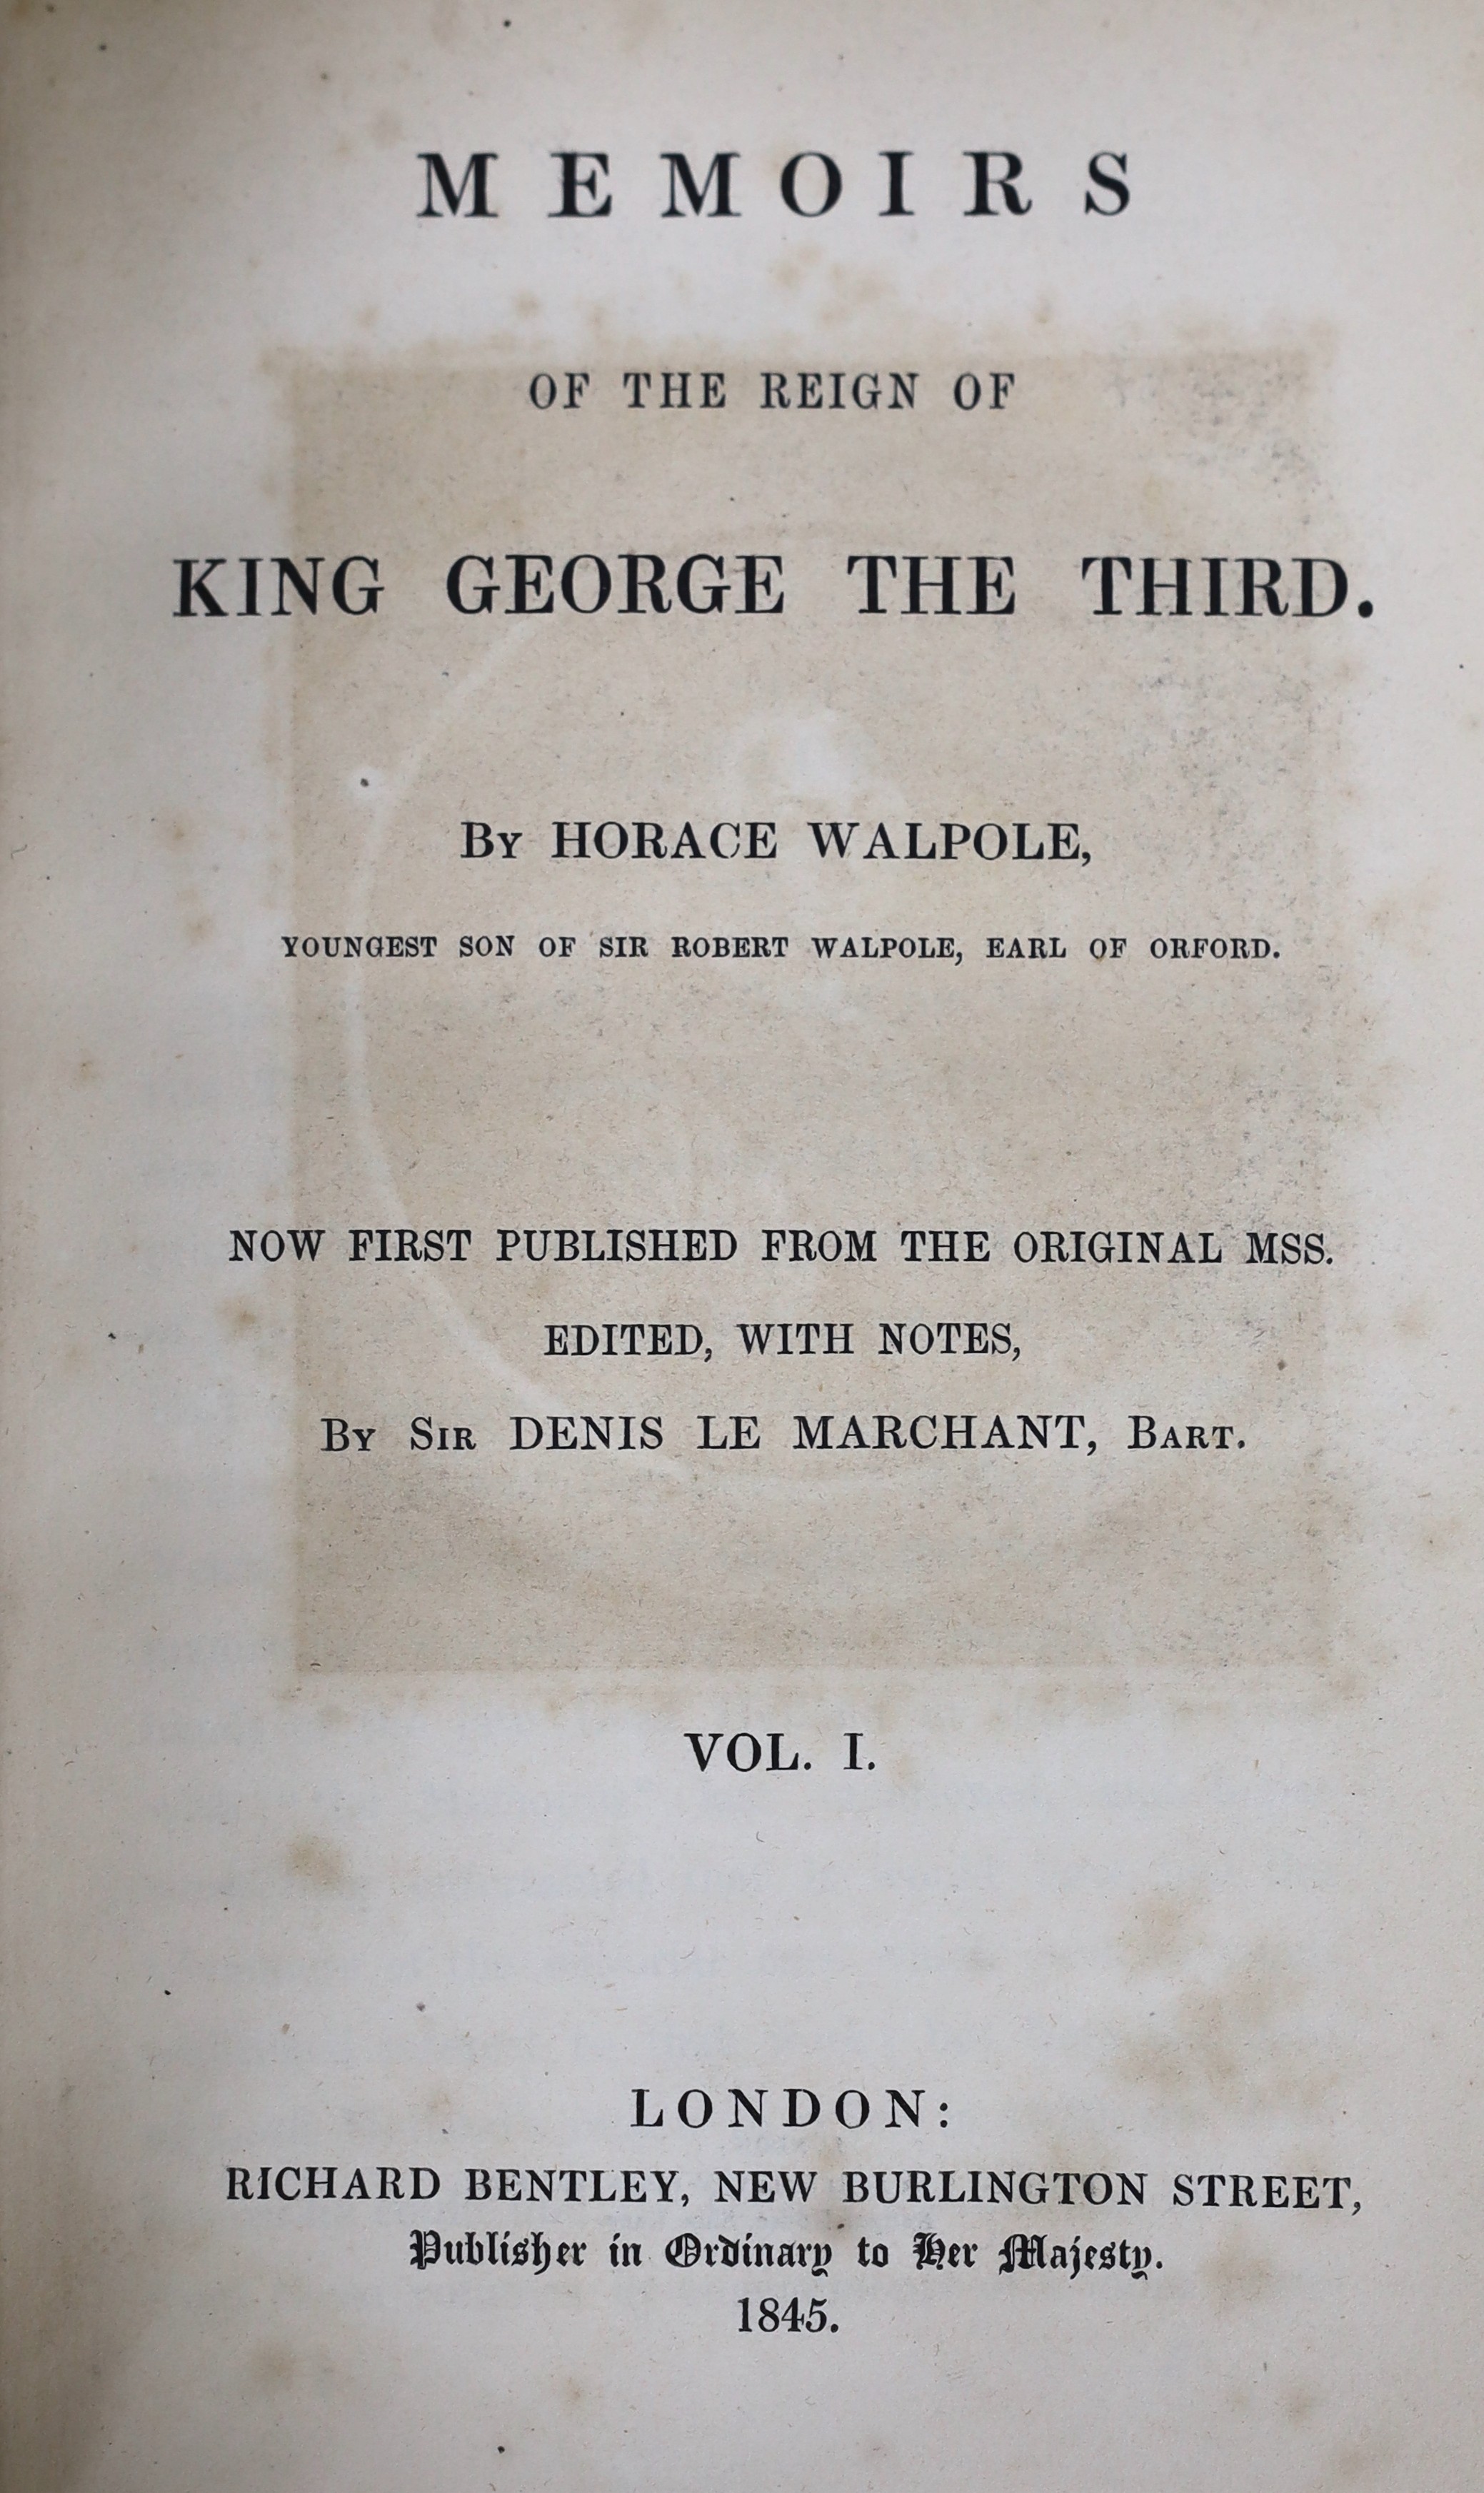 Walpole, Horace, 4th Earl of Orford - Memoirs of the Reign of King George the Third, 4 vols, 8vo, calf rebacked, with portrait frontises, occasional spotting throughout, inner hinges strengthened with tape, London, 1845;